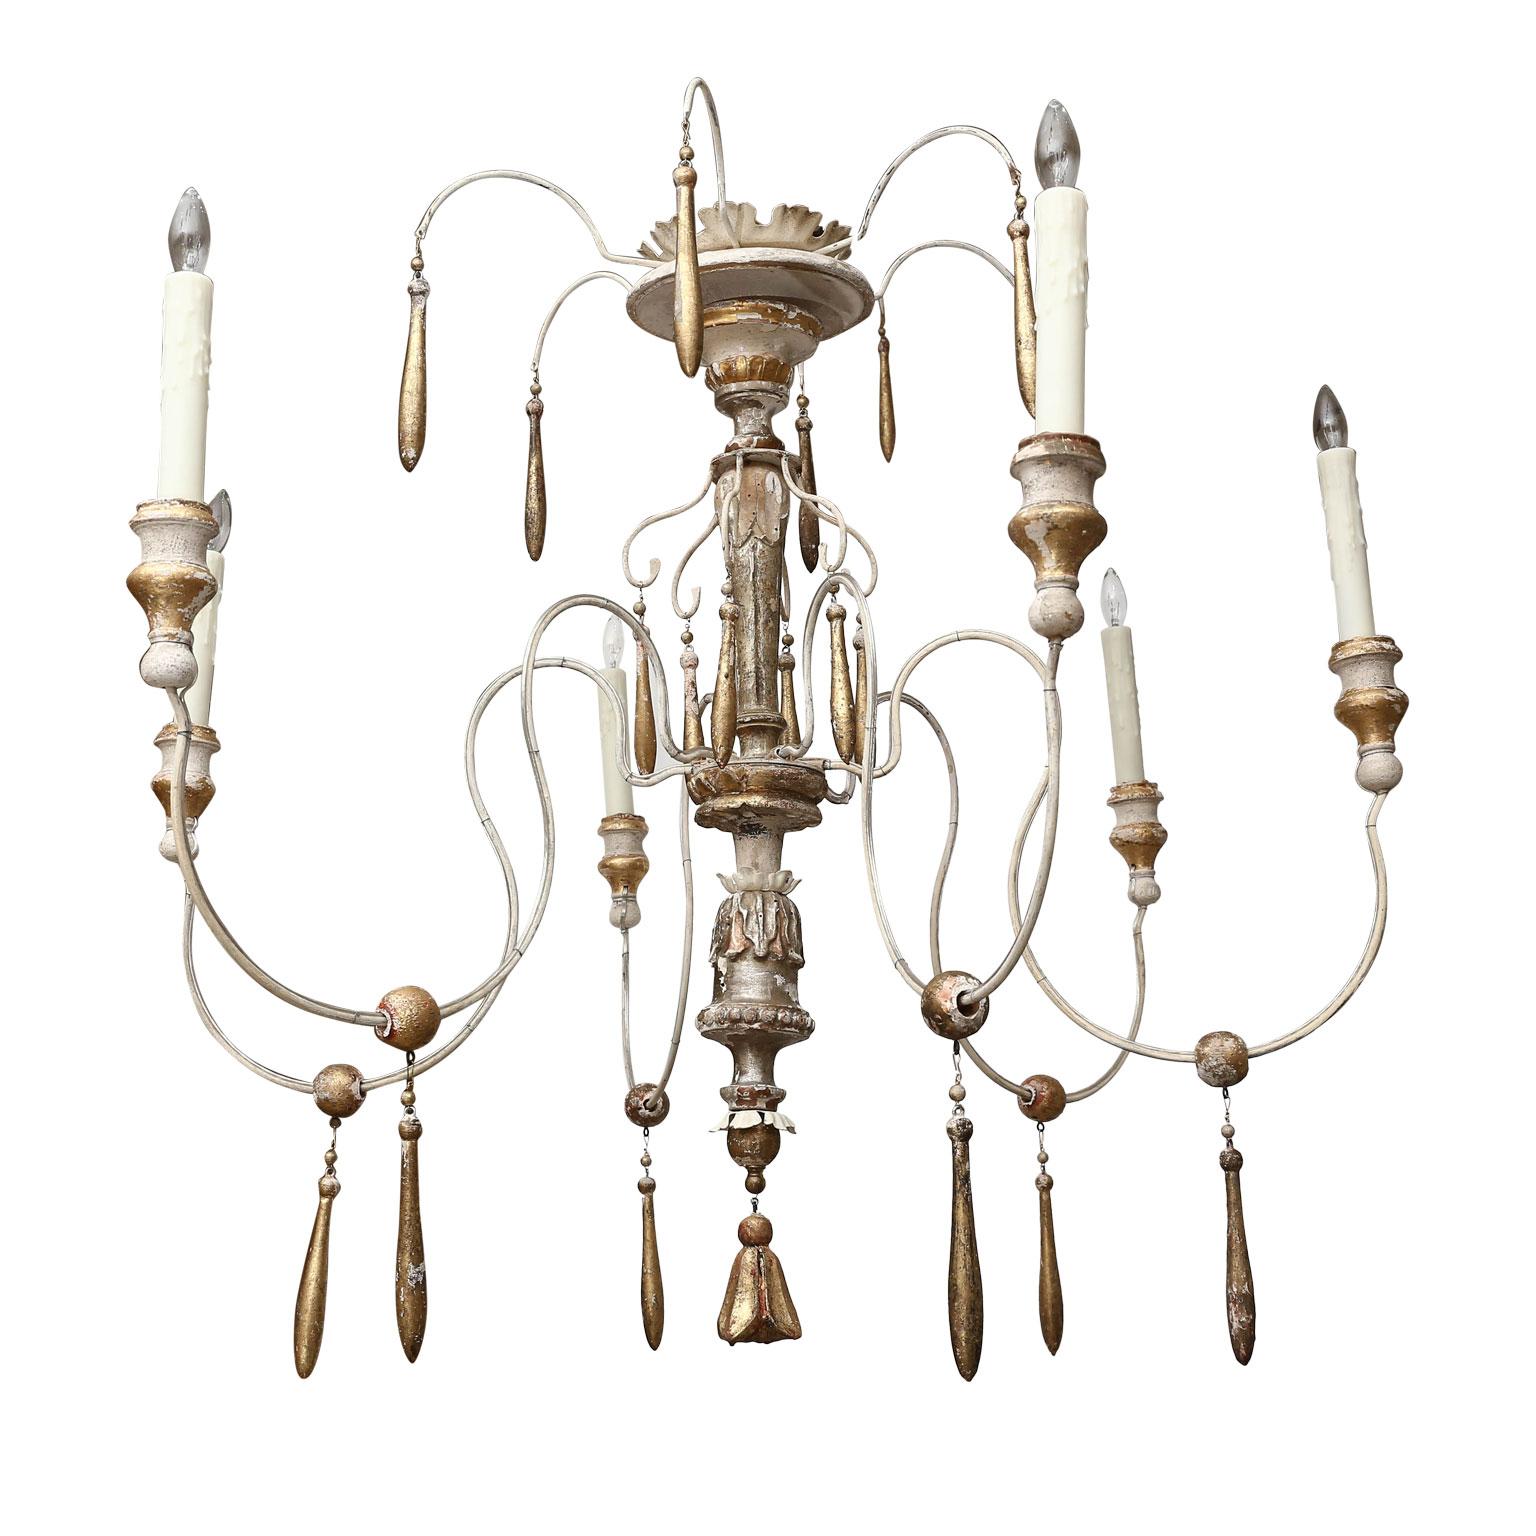 Six-arm Italian chandelier, newly constructed from 18th century and later elements. Newly wired, using all UL listed parts, for use within the USA. Lights use candelabras-size bulbs. Includes chain and a canopy (listed height does not include chain).